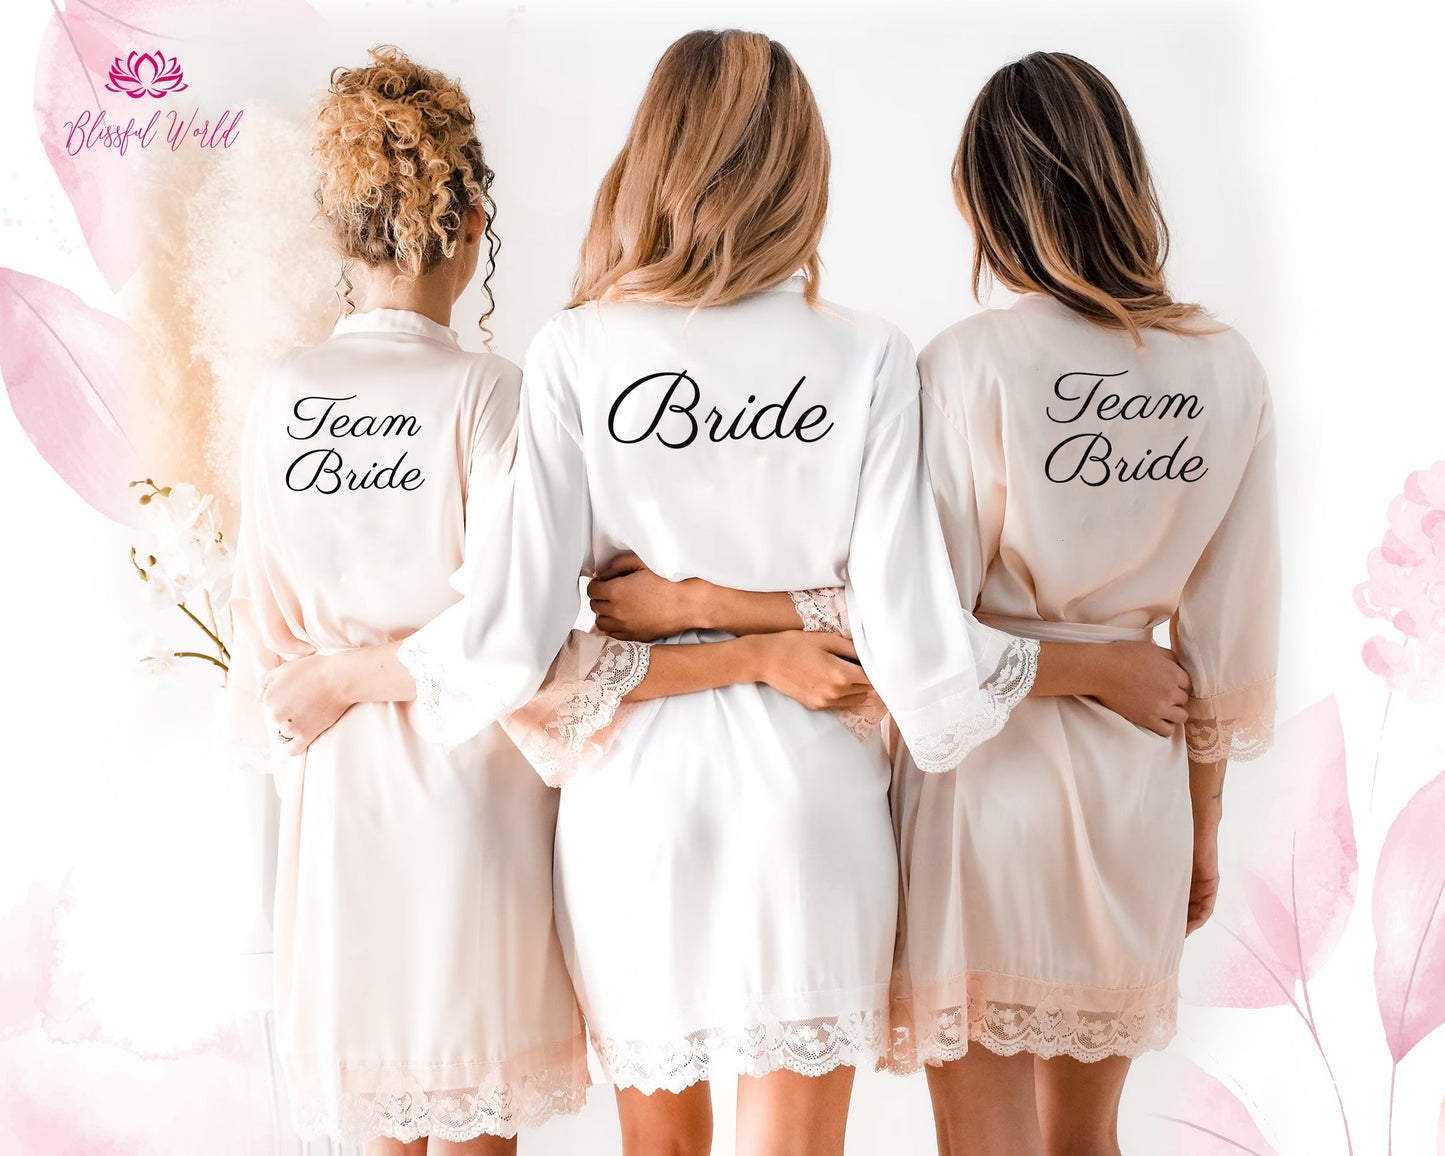 Bridesmaid Robes Rayon Cotton With Lace Trim | Bridal Party Robes | Personalized Bridesmaid Gifts | Bridal Shower Gift | Bridal Robes / Robes / Cotton Lace Robe